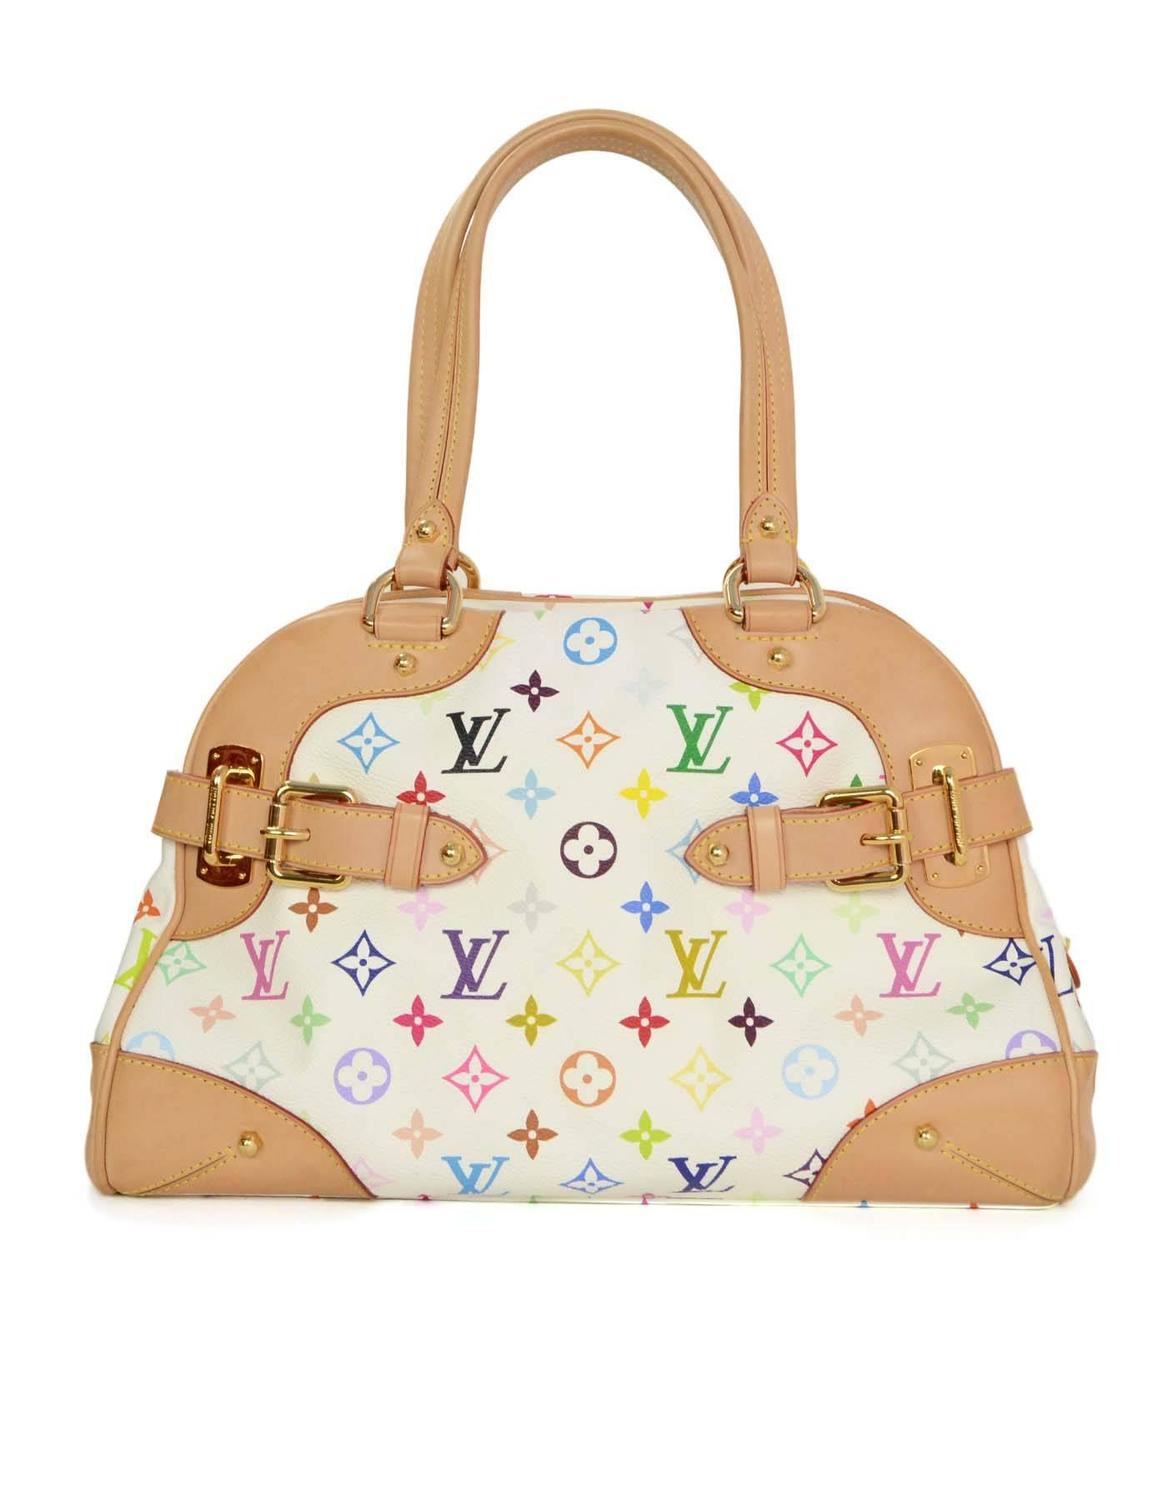 Louis Vuitton Multi-Colored Monogram Claudia Tote Bag GHWRT. $2,270 For Sale at 1stdibs